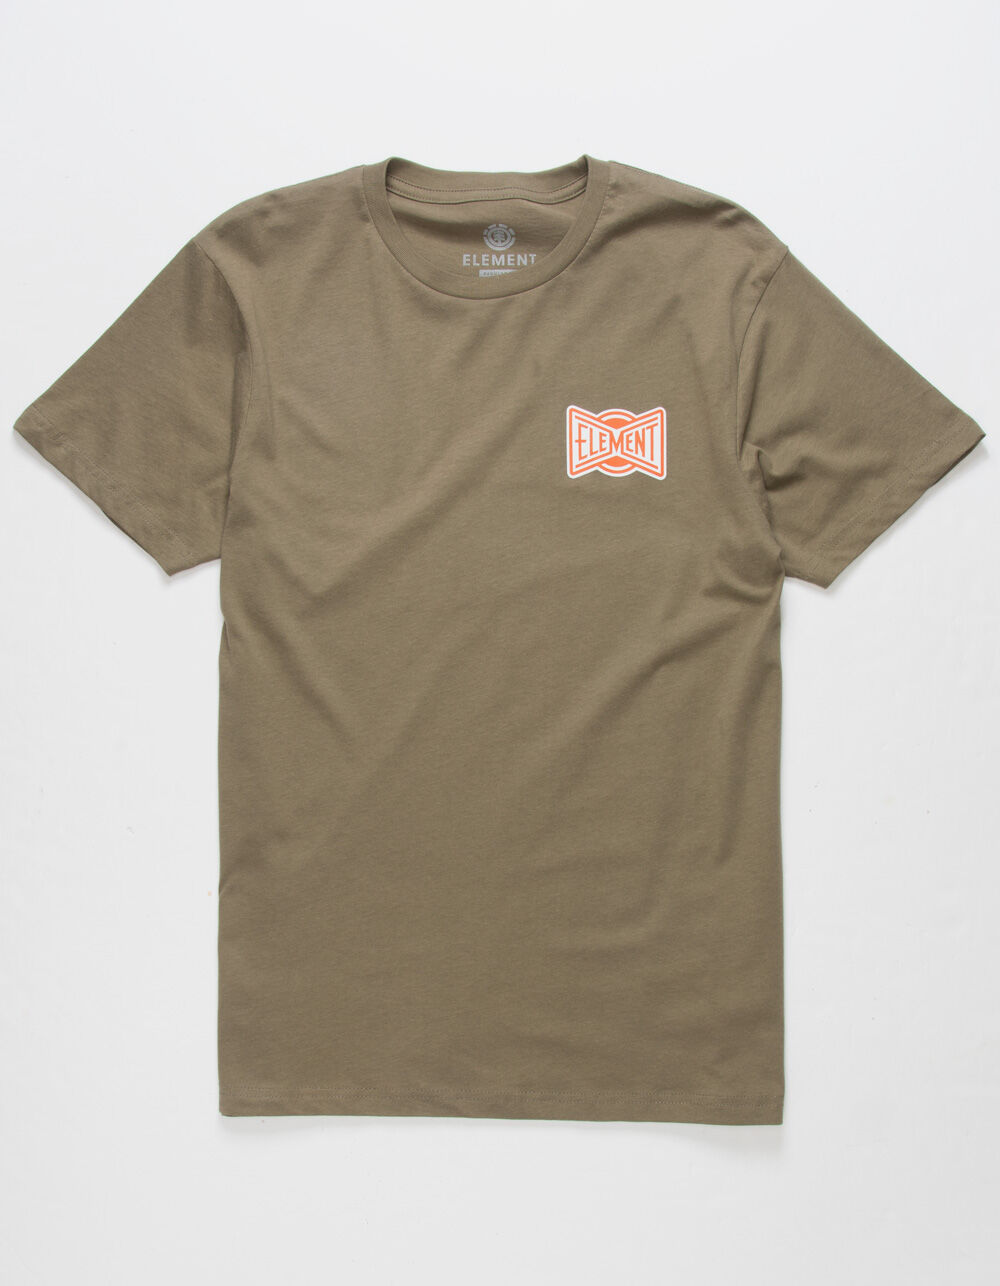 ELEMENT Neon Station Mens Tee - MILITARY | Tillys